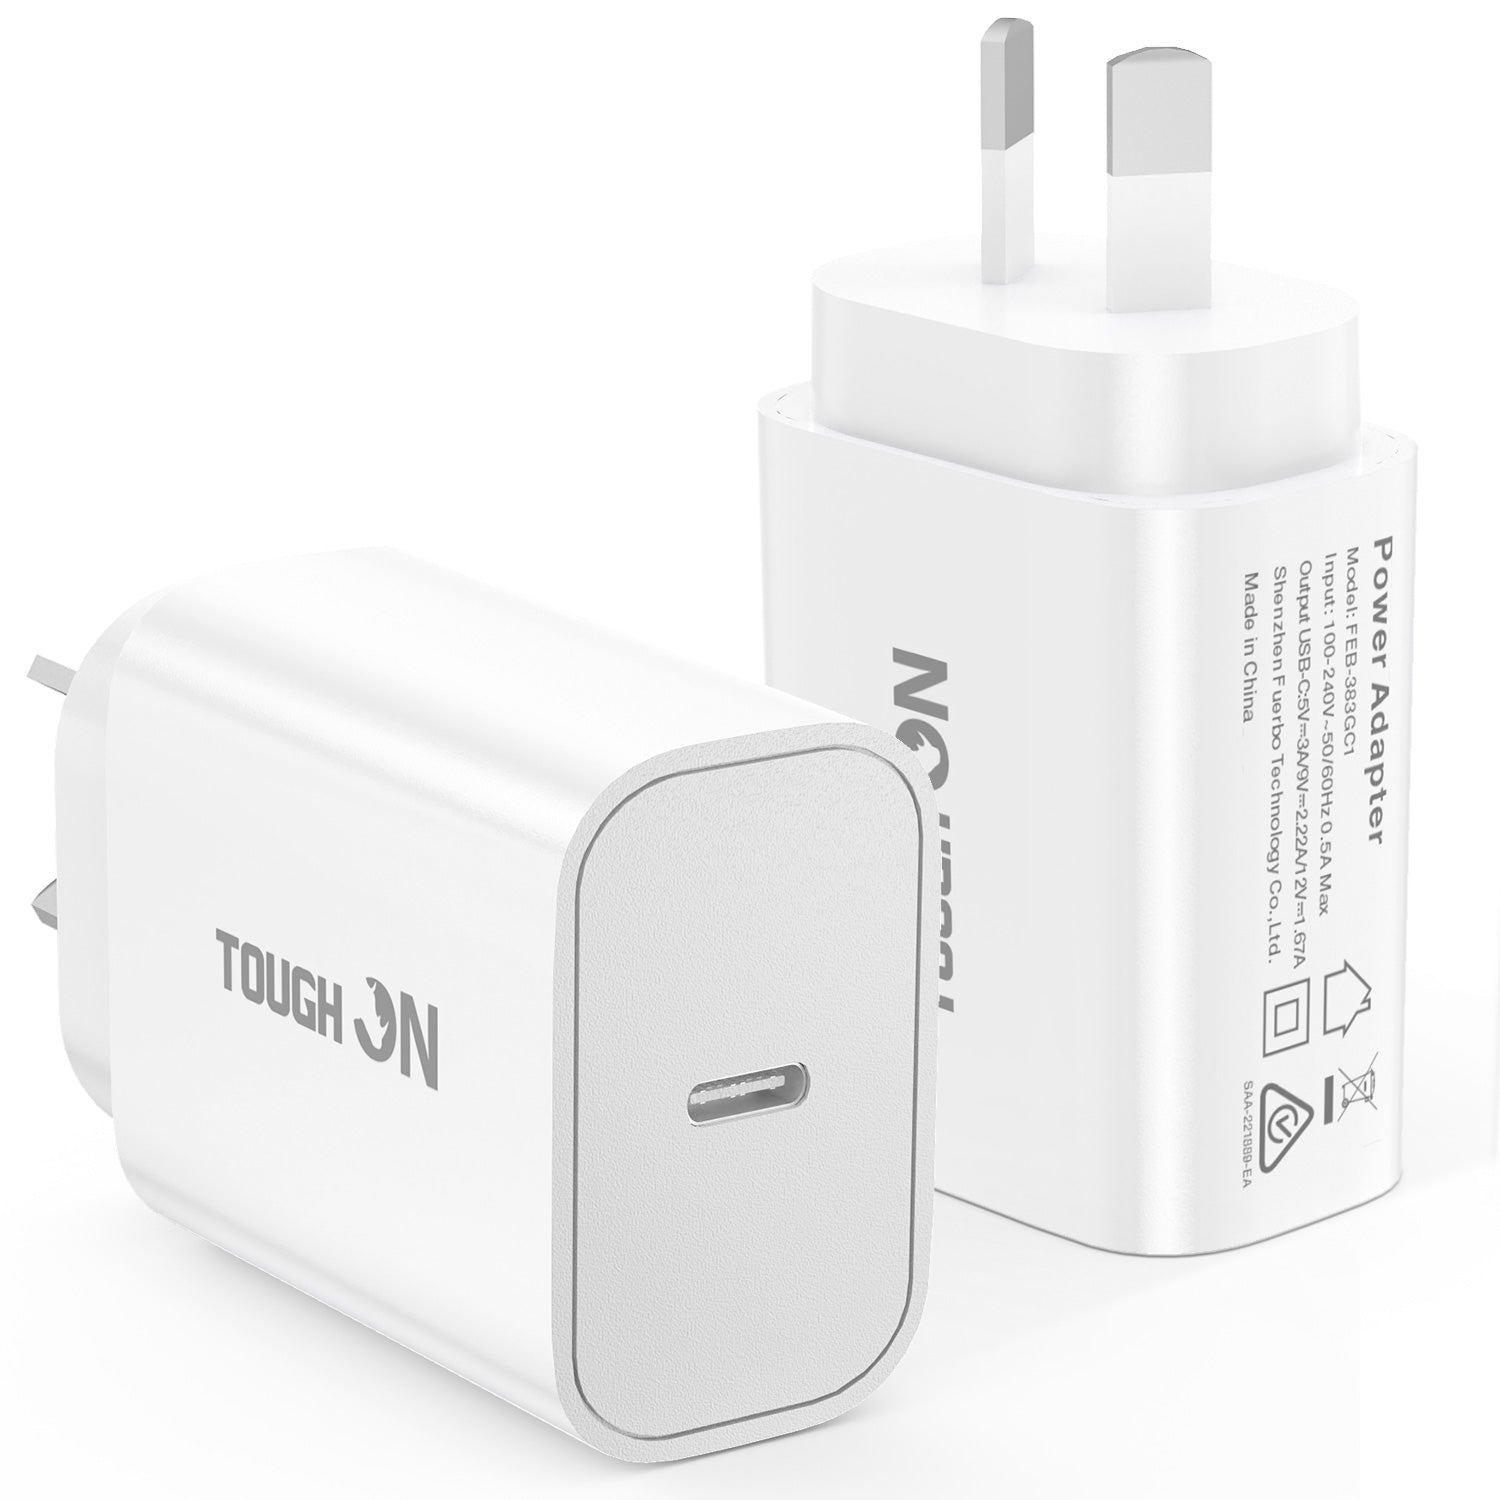 Tough On Tough Power Wall Charger 20W USB C Fast Charge PD 3.0